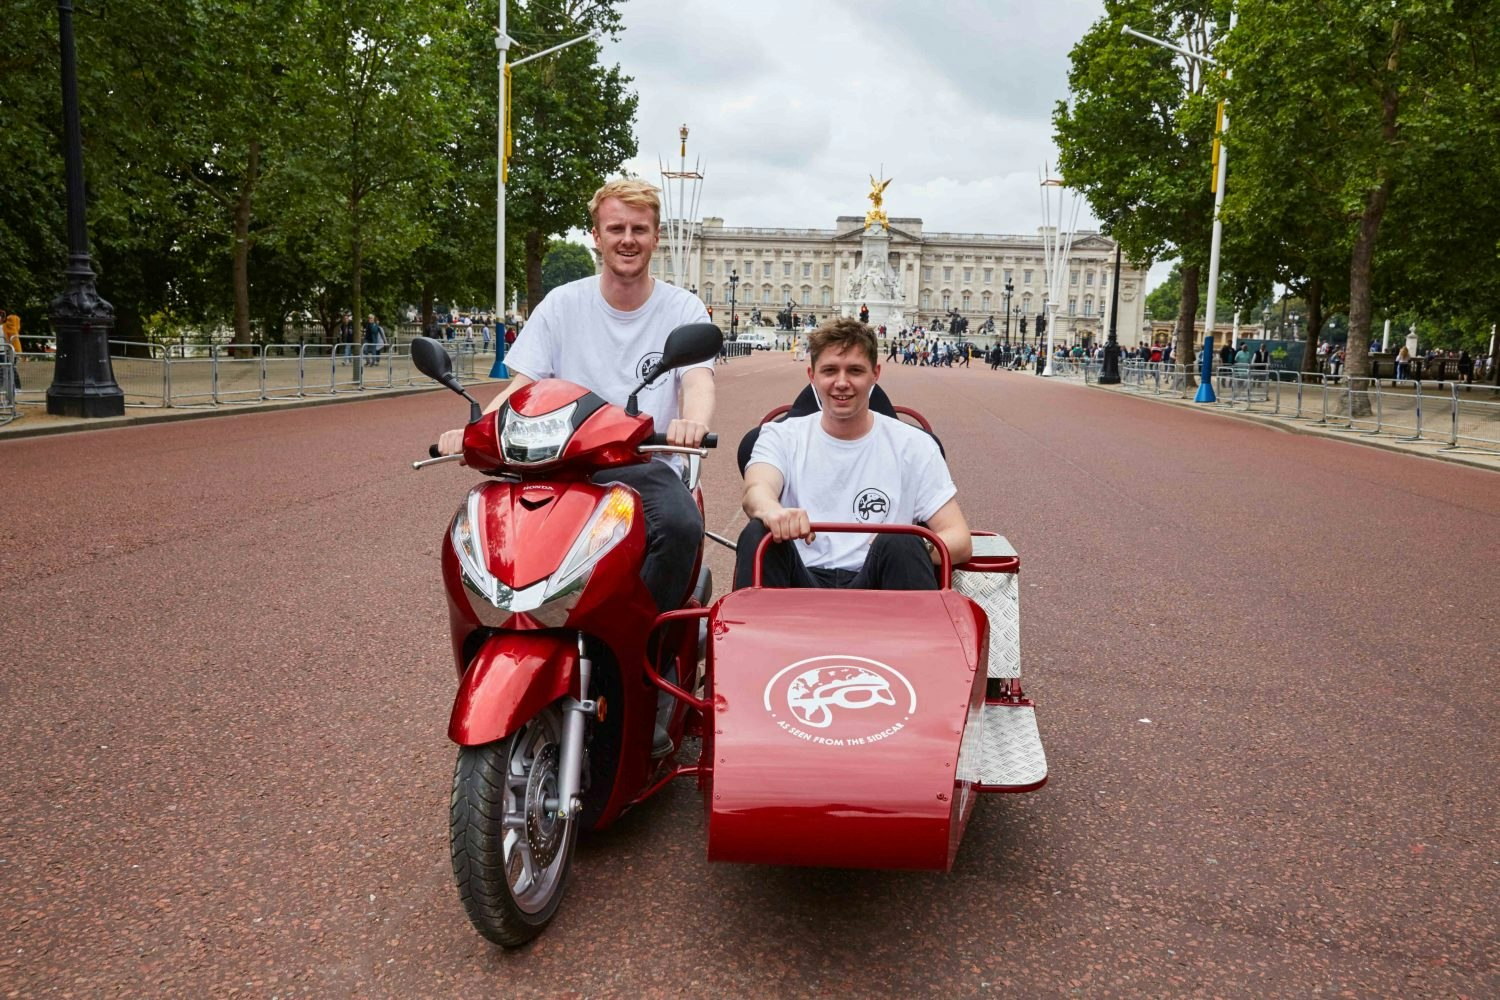 Travel consultants plan round the world trip on a scooter